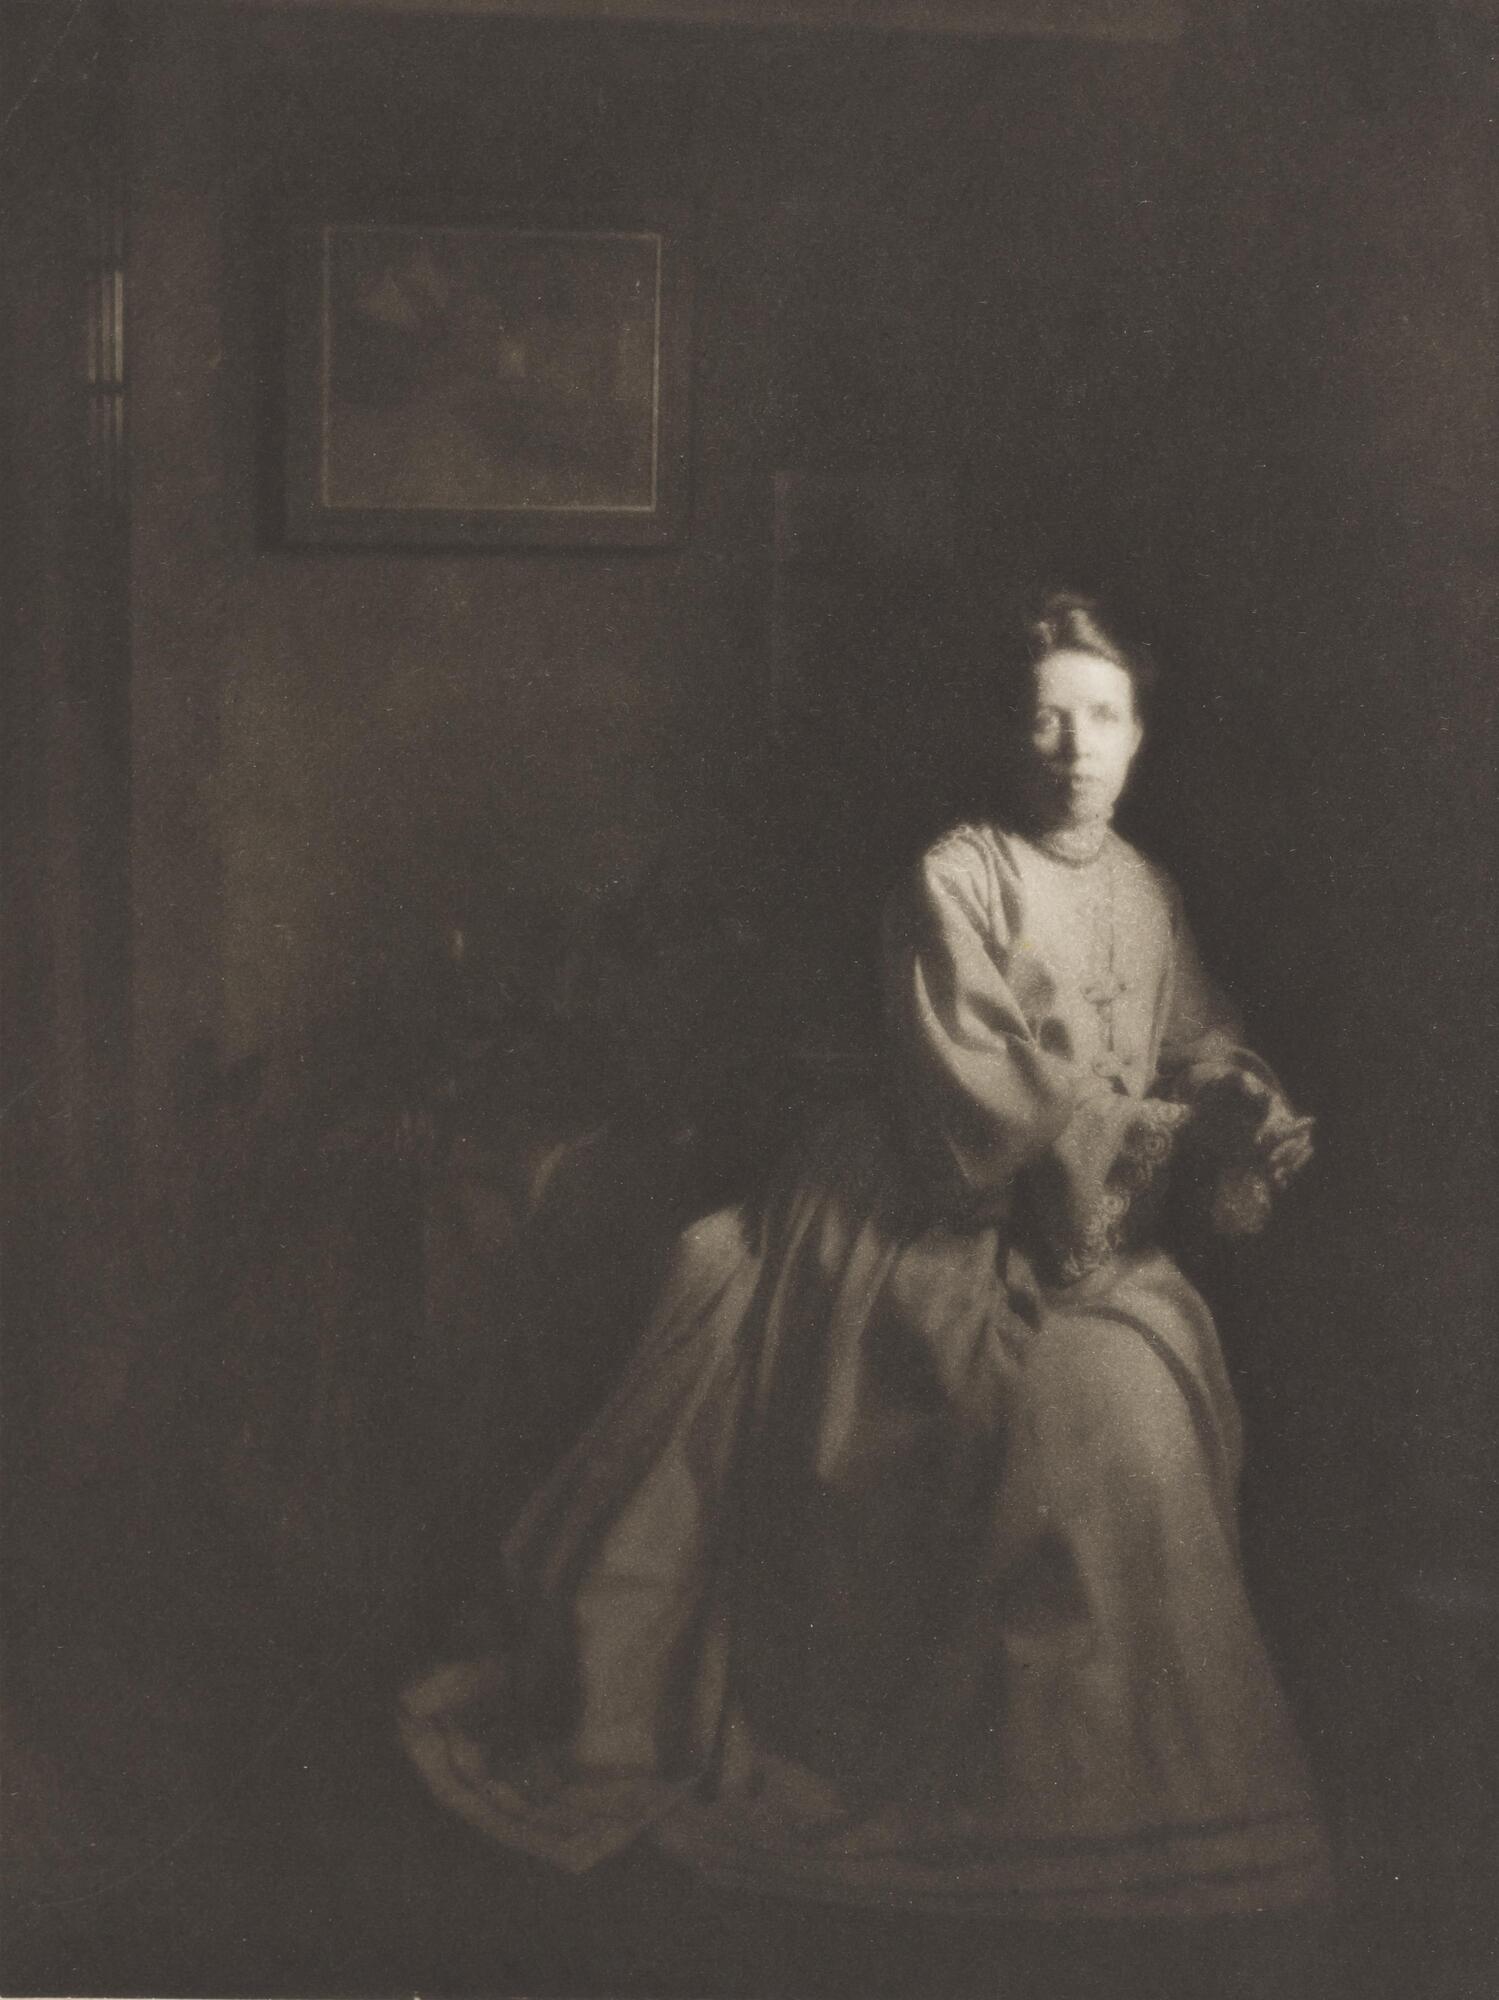 Portrait of a woman in a darkened interior space, seated next to a window.